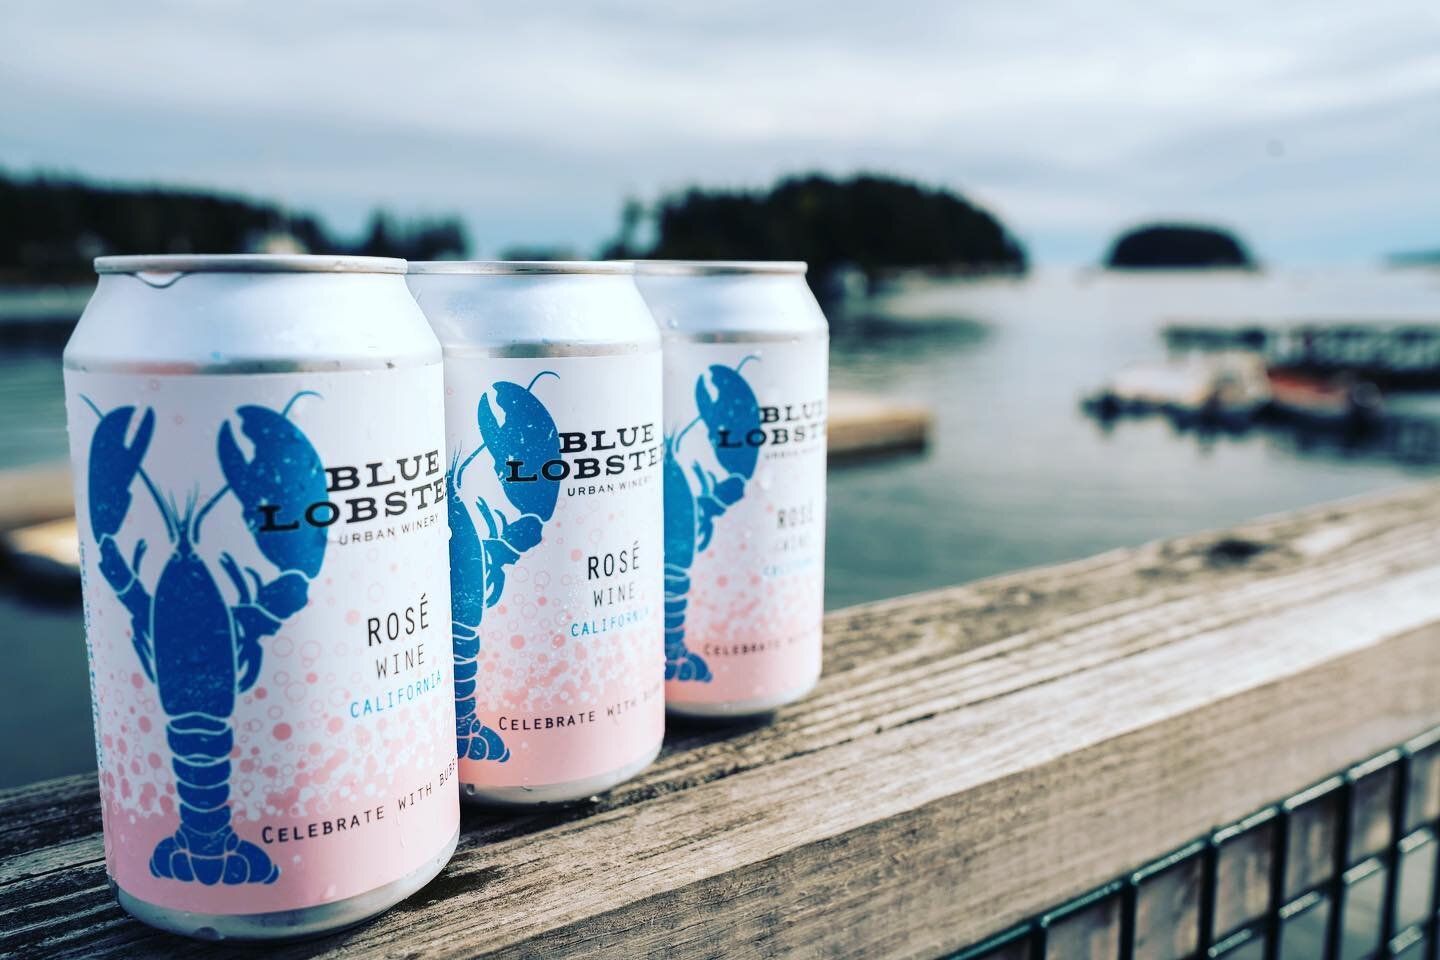 Sun is out! We&rsquo;ll be open from 4-8 today if you need a 4 pack to-go! Also $6 wine pours for happy hour. 

Photo credit: @aschundler